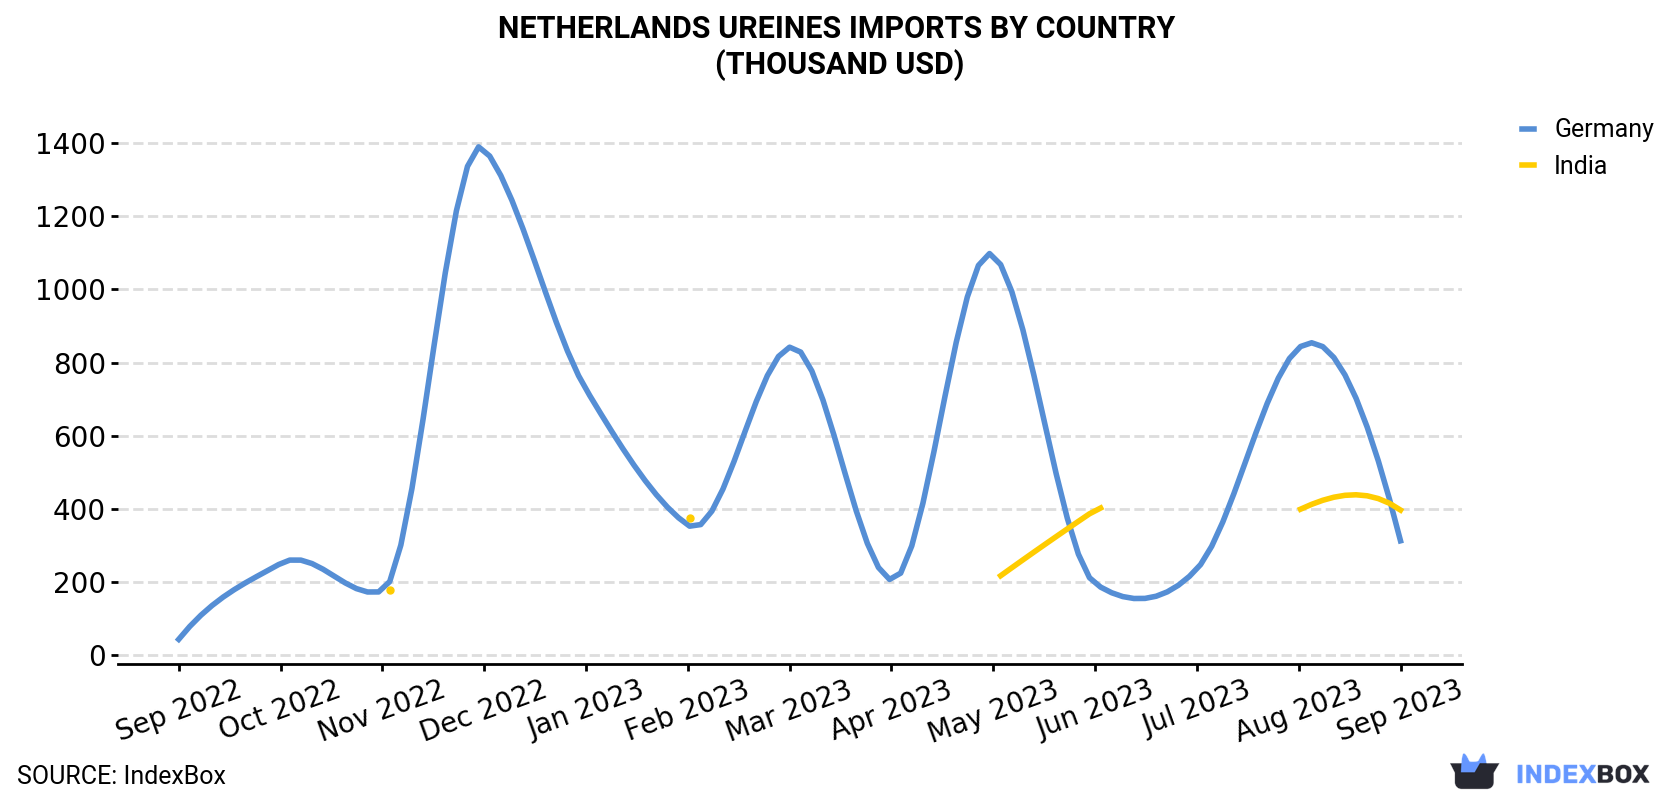 Netherlands Ureines Imports By Country (Thousand USD)